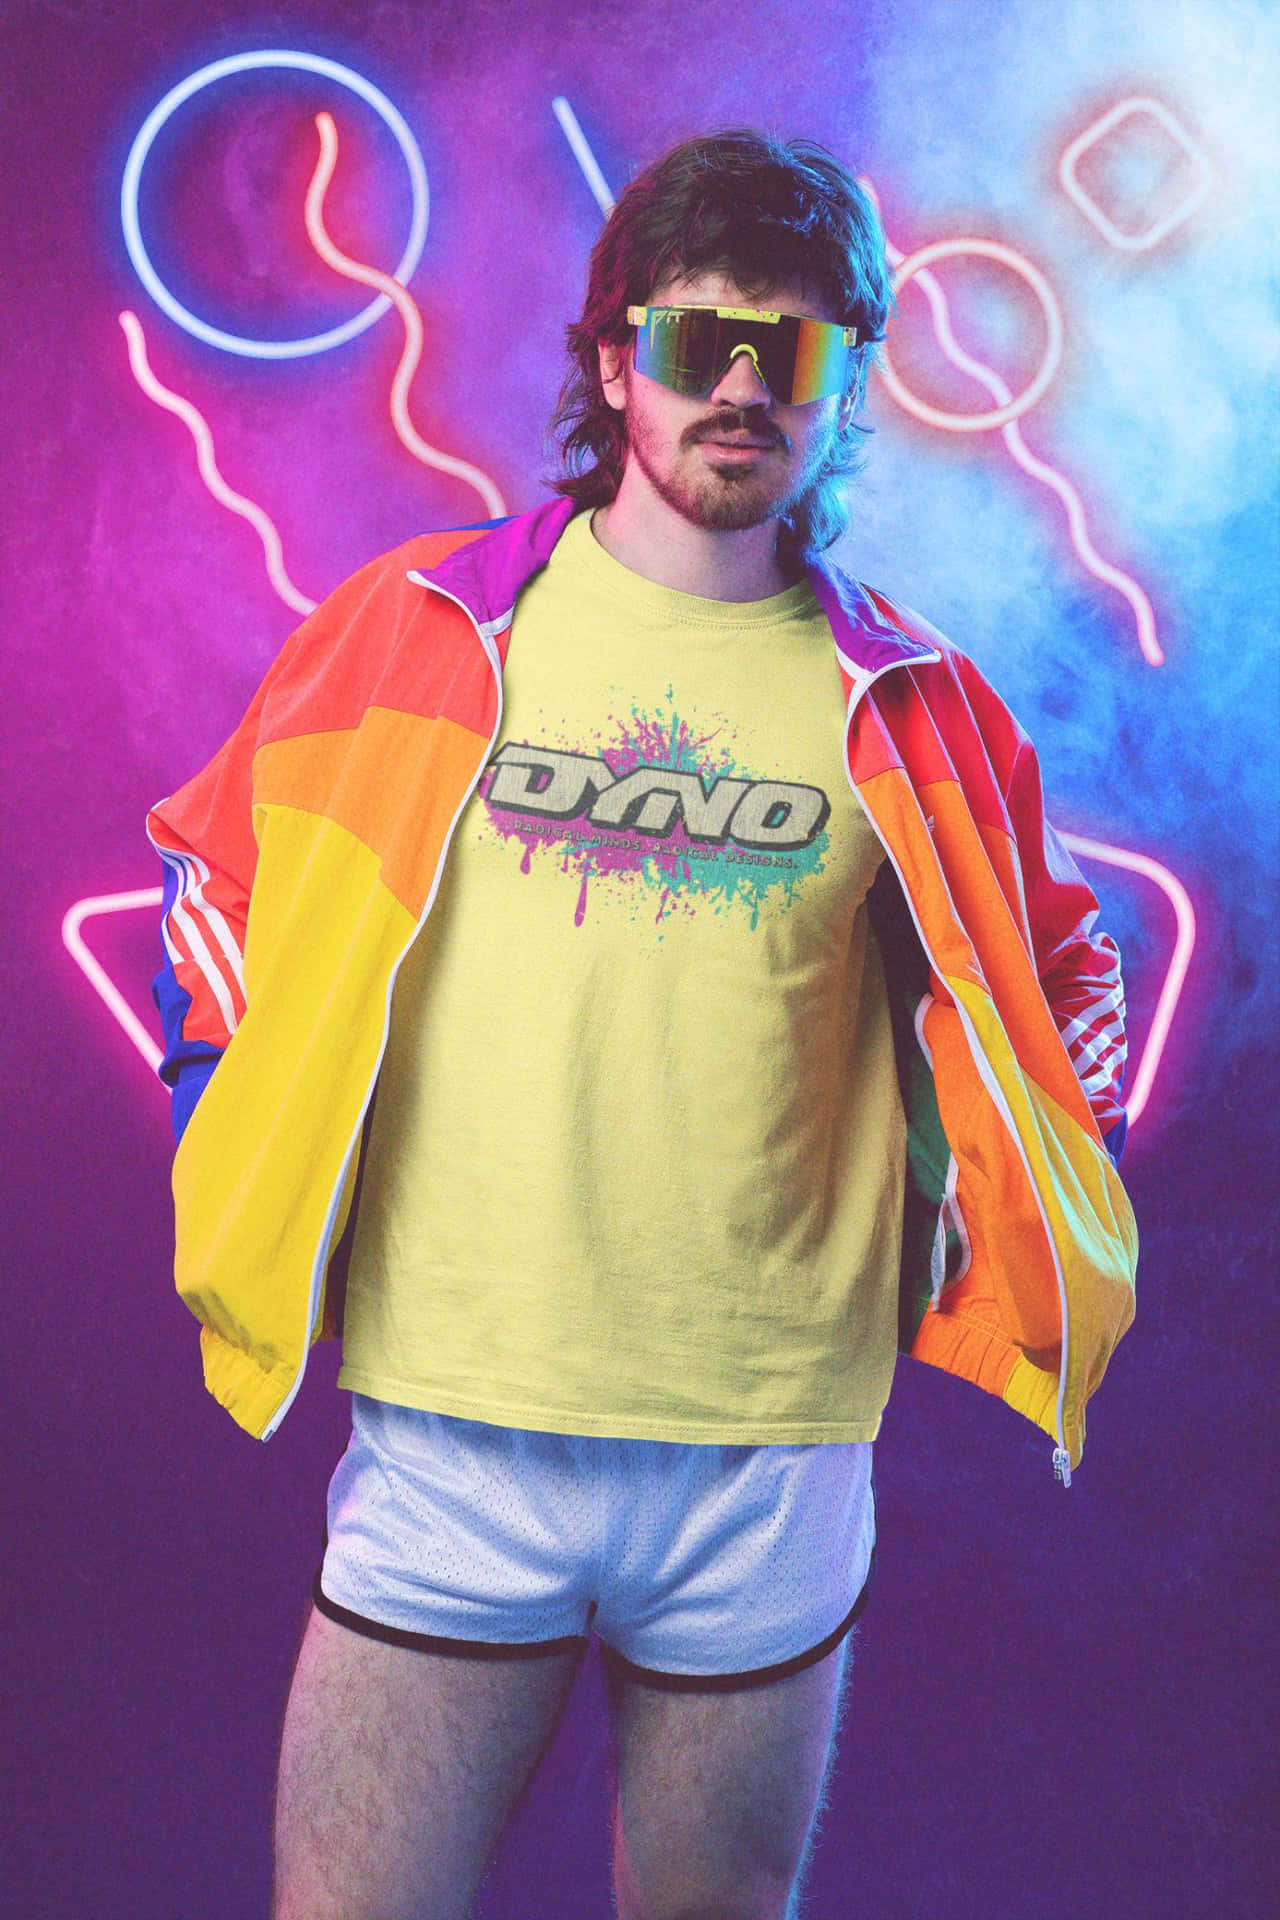 Download A Man In A Neon Jacket And Shorts